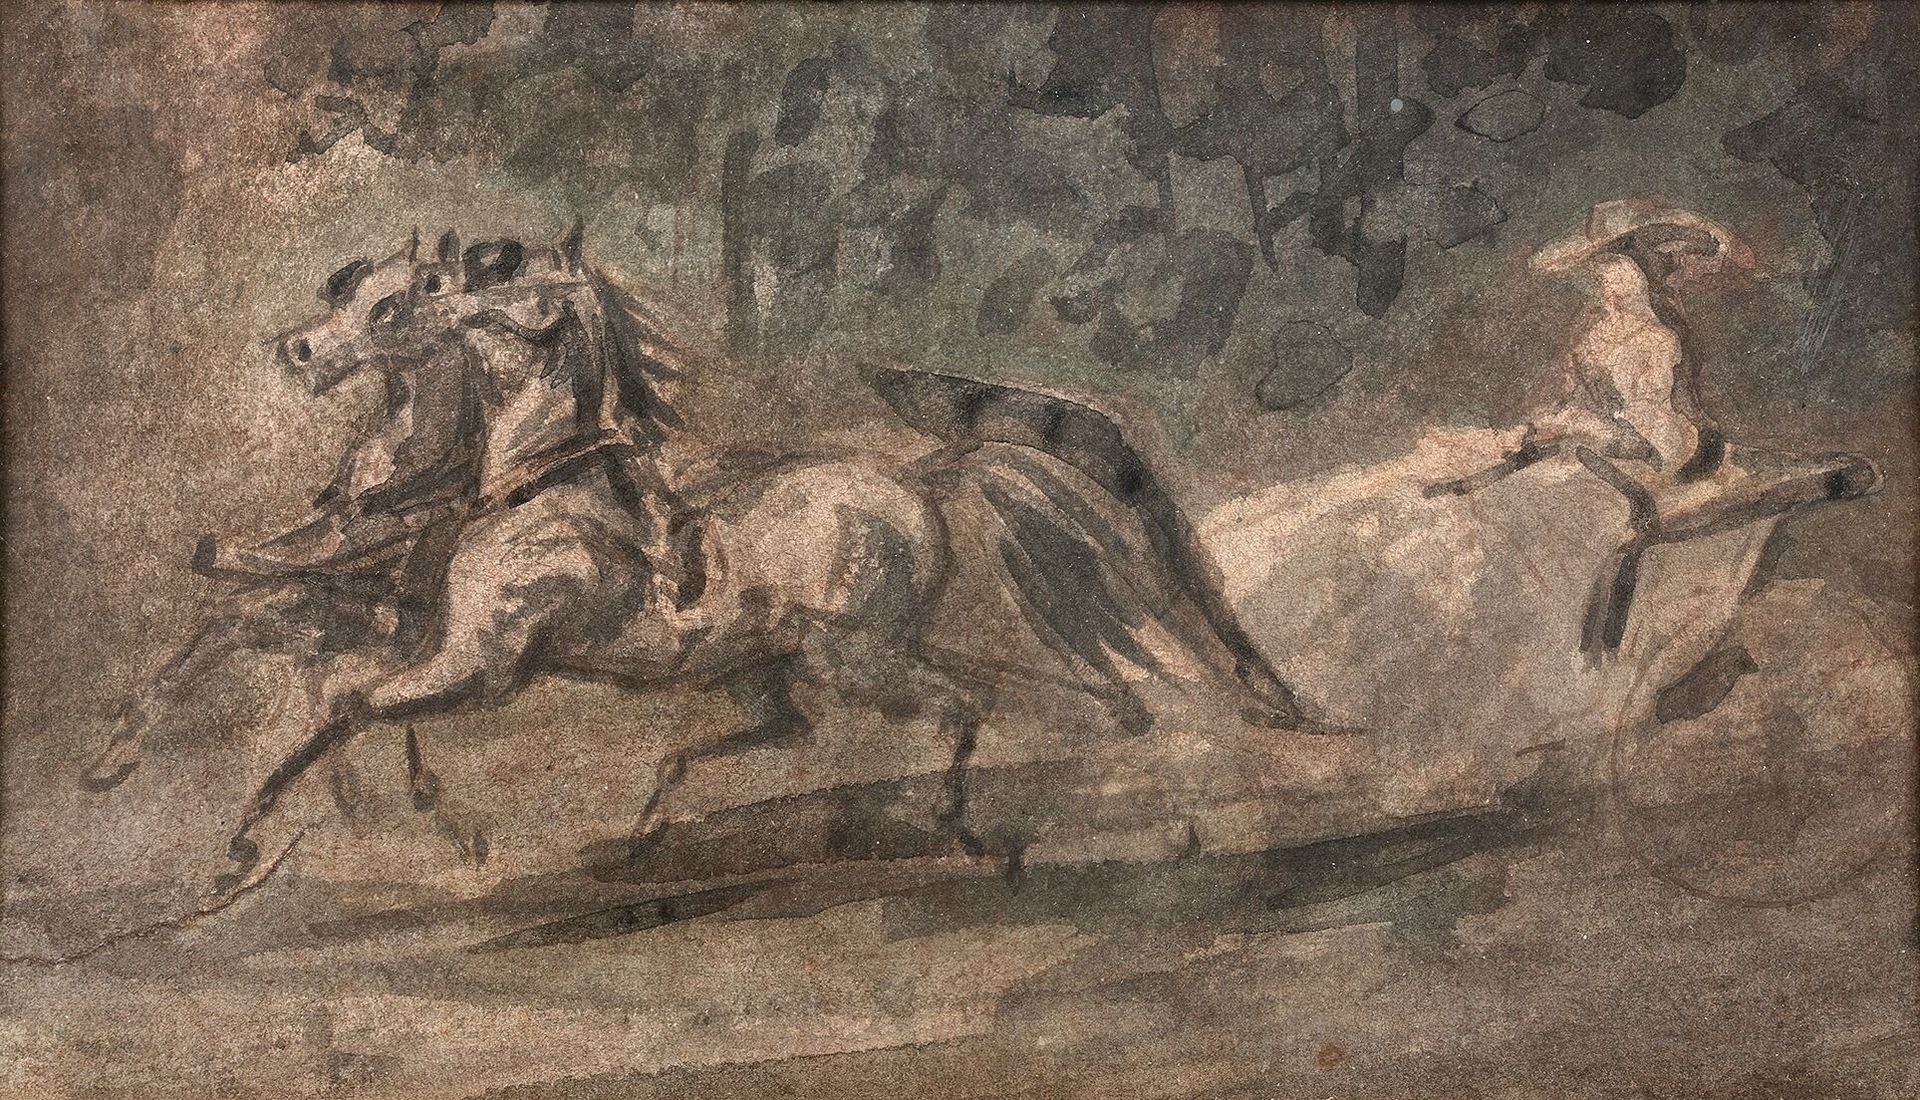 Null Constantin GUYS (1802-1892)

The carriage

Ink wash.

11 x 19,5 cm